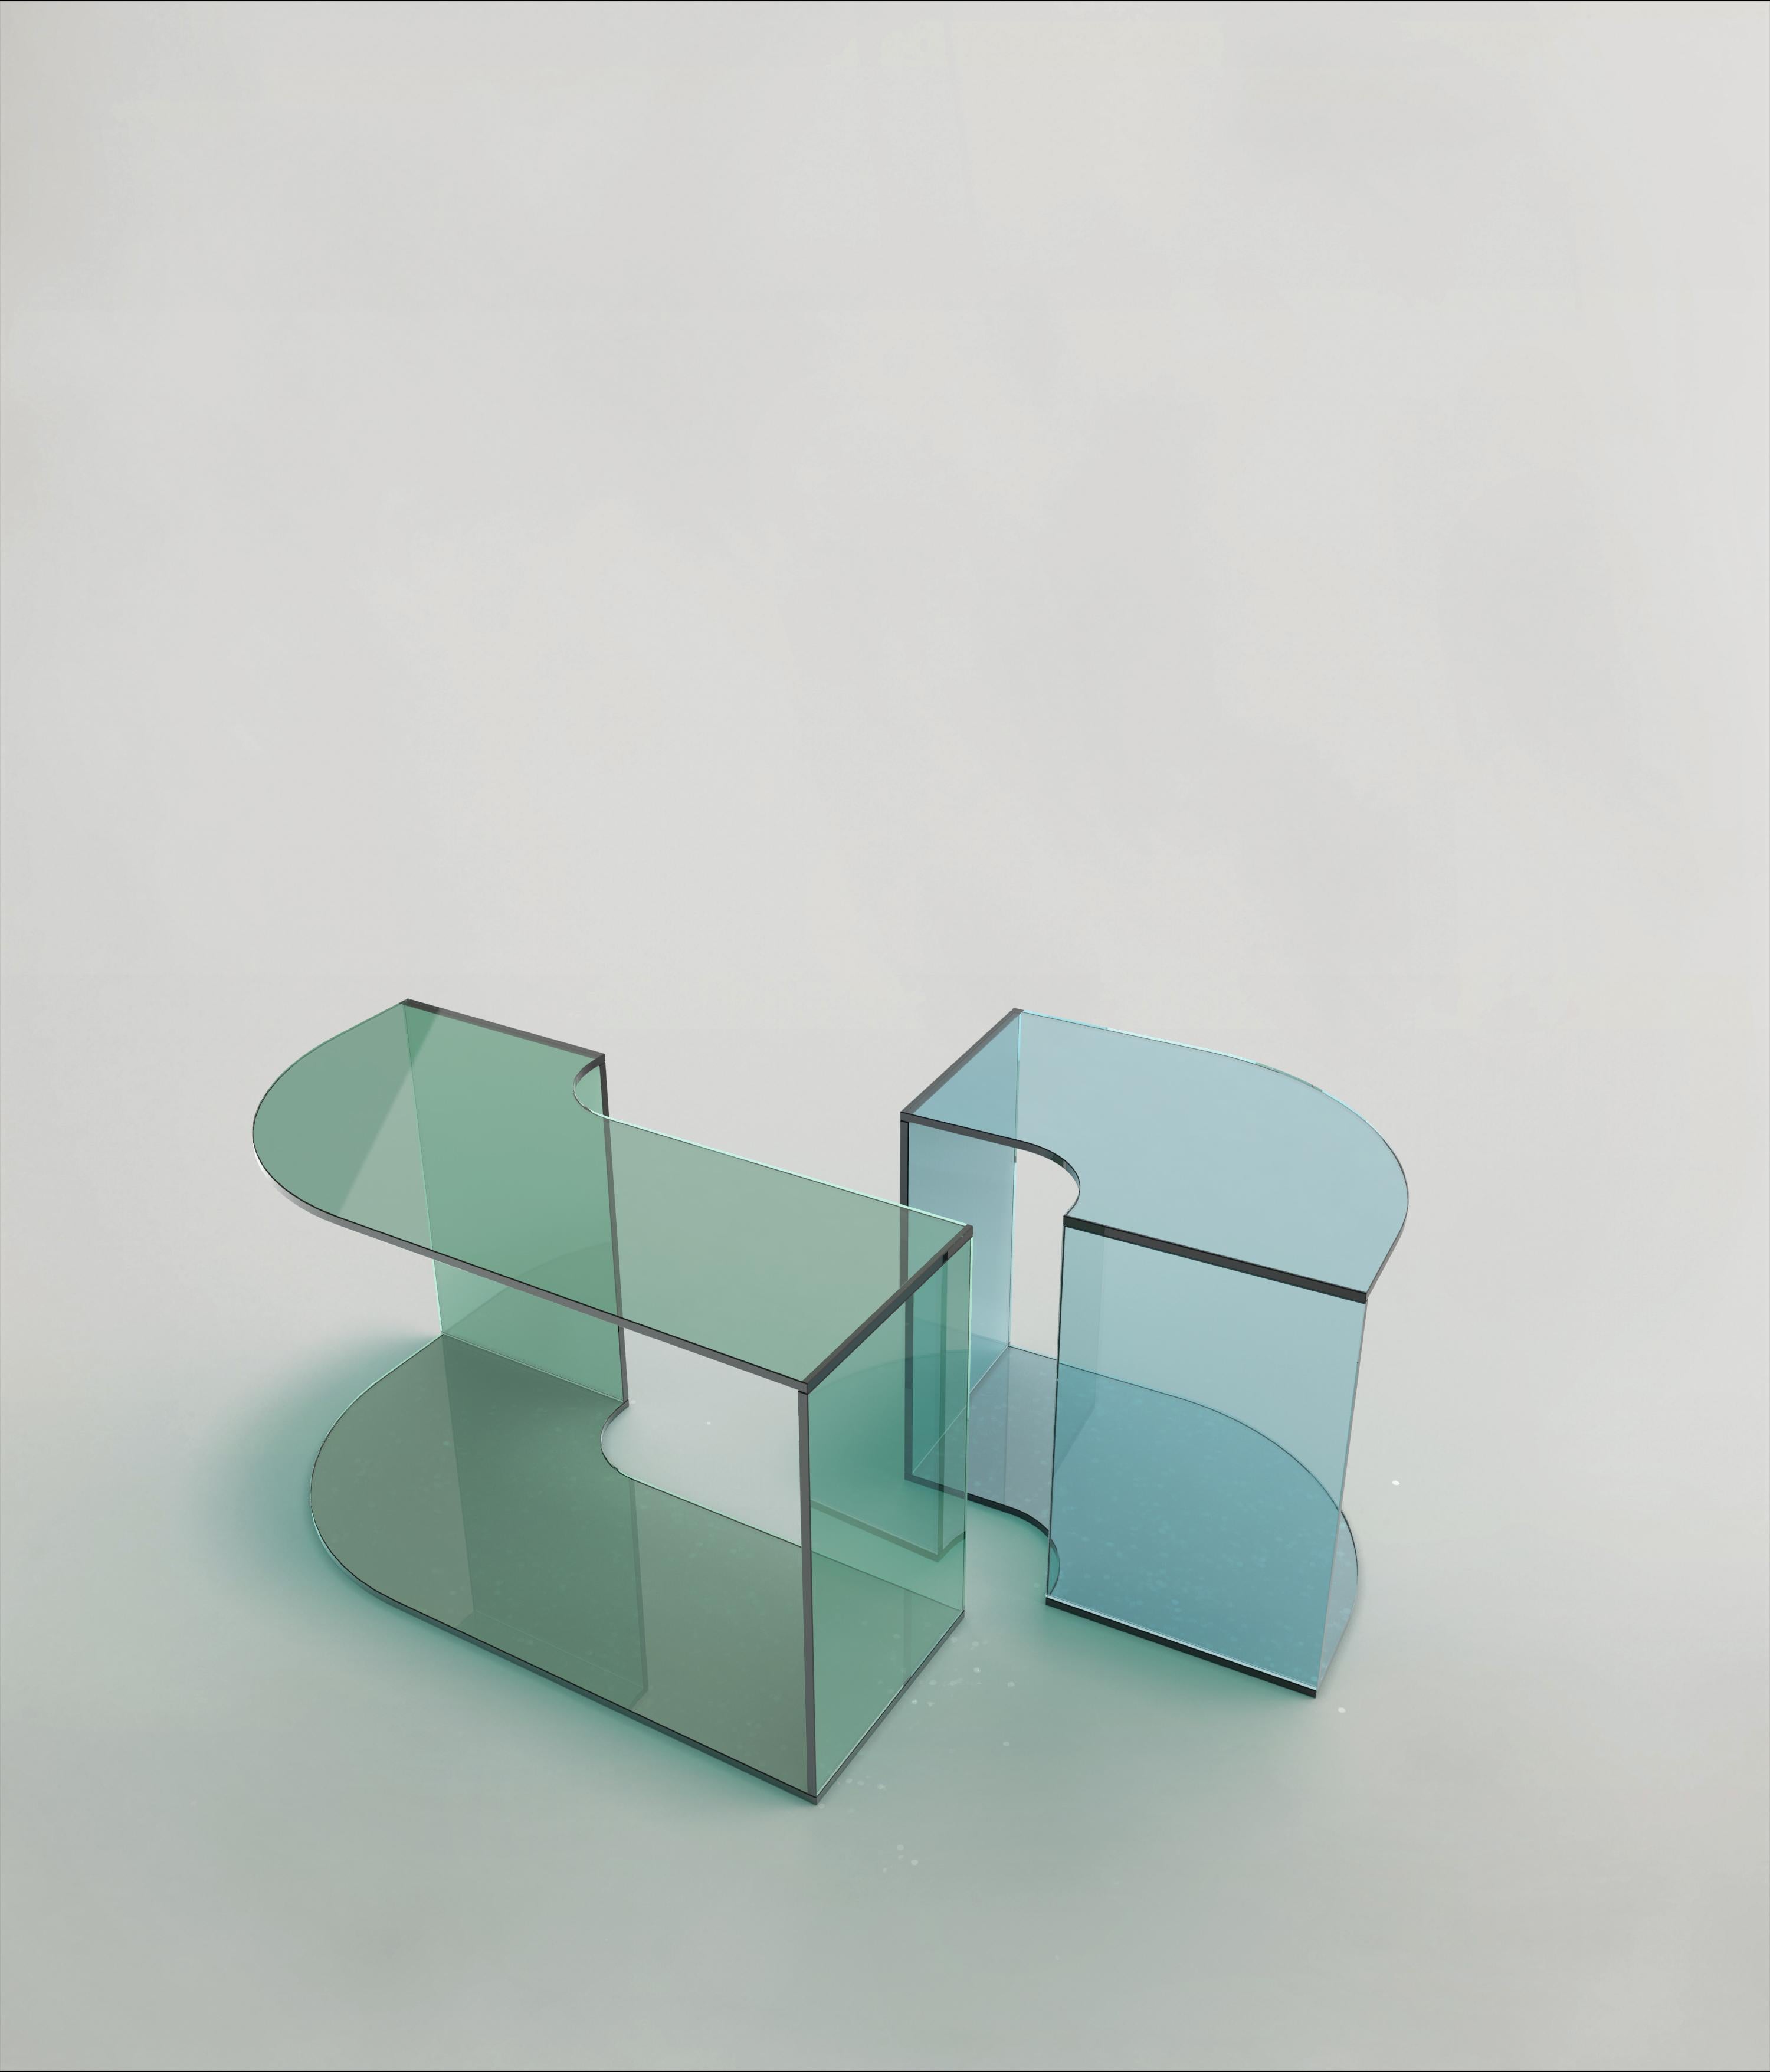 Set of 2 quarter V1 and V2 tables by Edizione Limitata
Limited Edition of 1000 pieces. Signed and numbered.
Dimensions: 
The green one :
Dimensions : W 35 x D 70 x H 41 cm
The blue one :
Dimensions: H 41 x W 35 x L 45 cm
Materials: Blue finish shiny